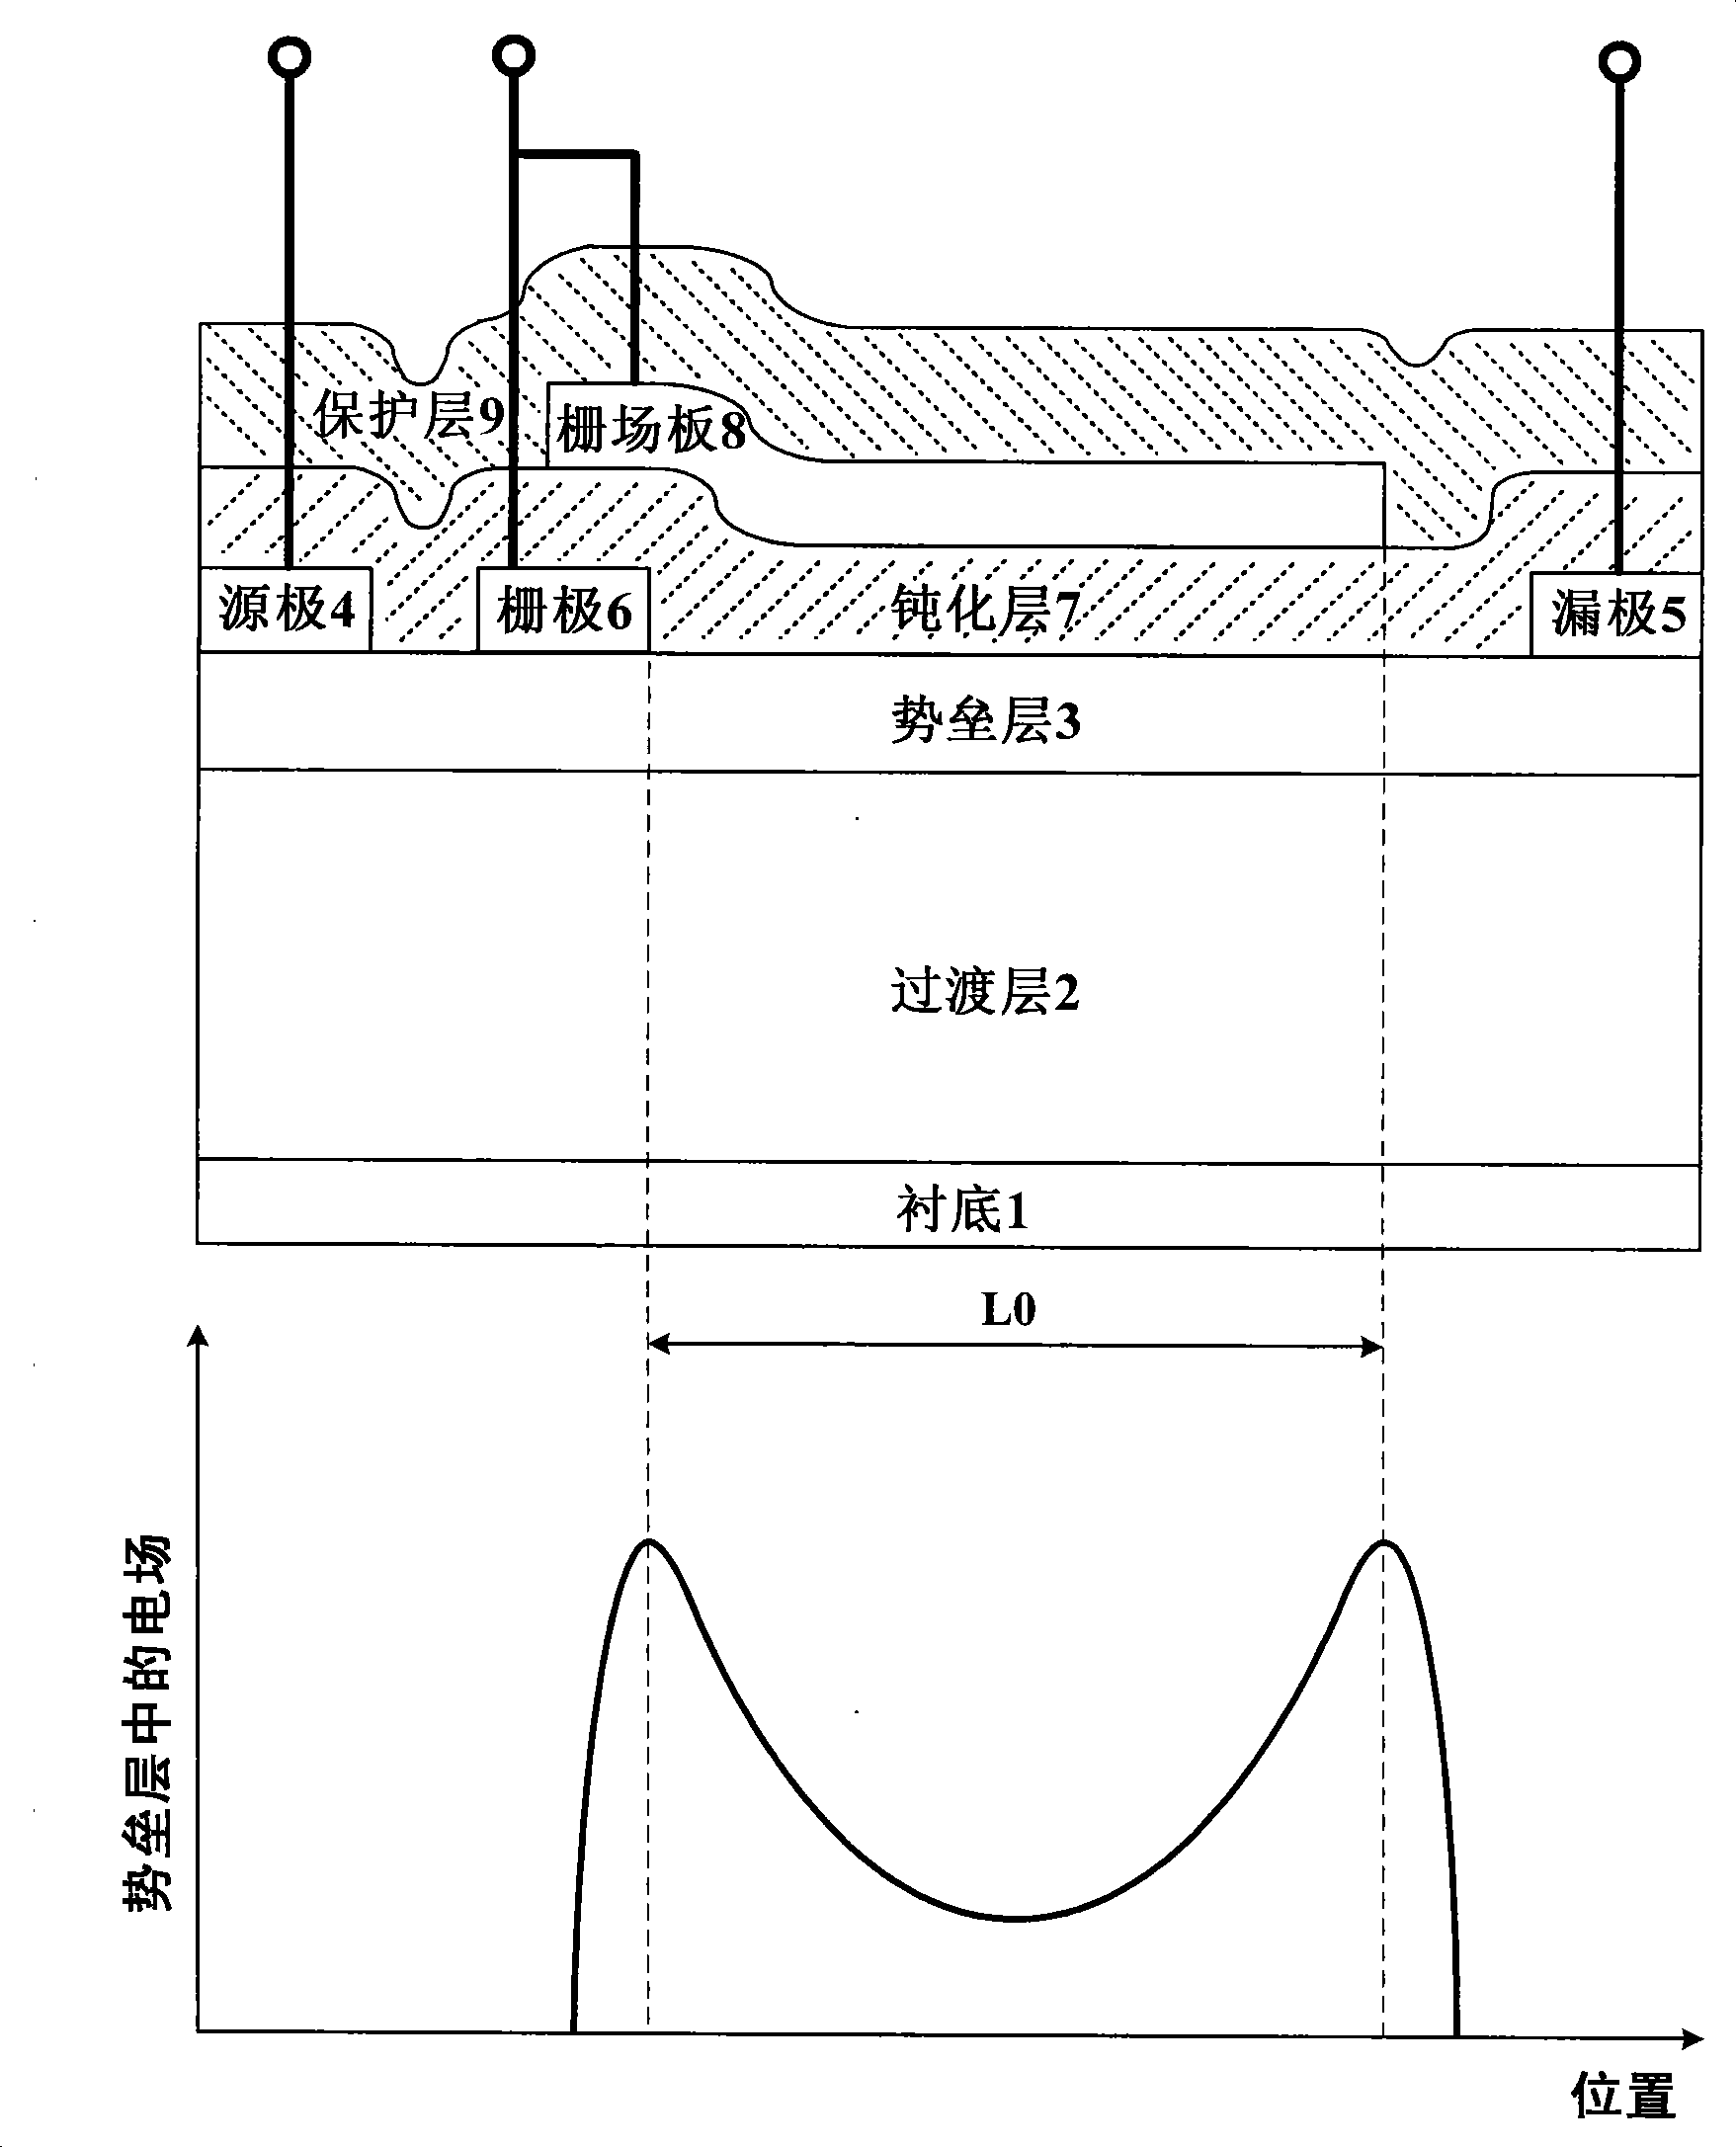 Groove gate type gate-leakage composite field plate transistor with high electron mobility